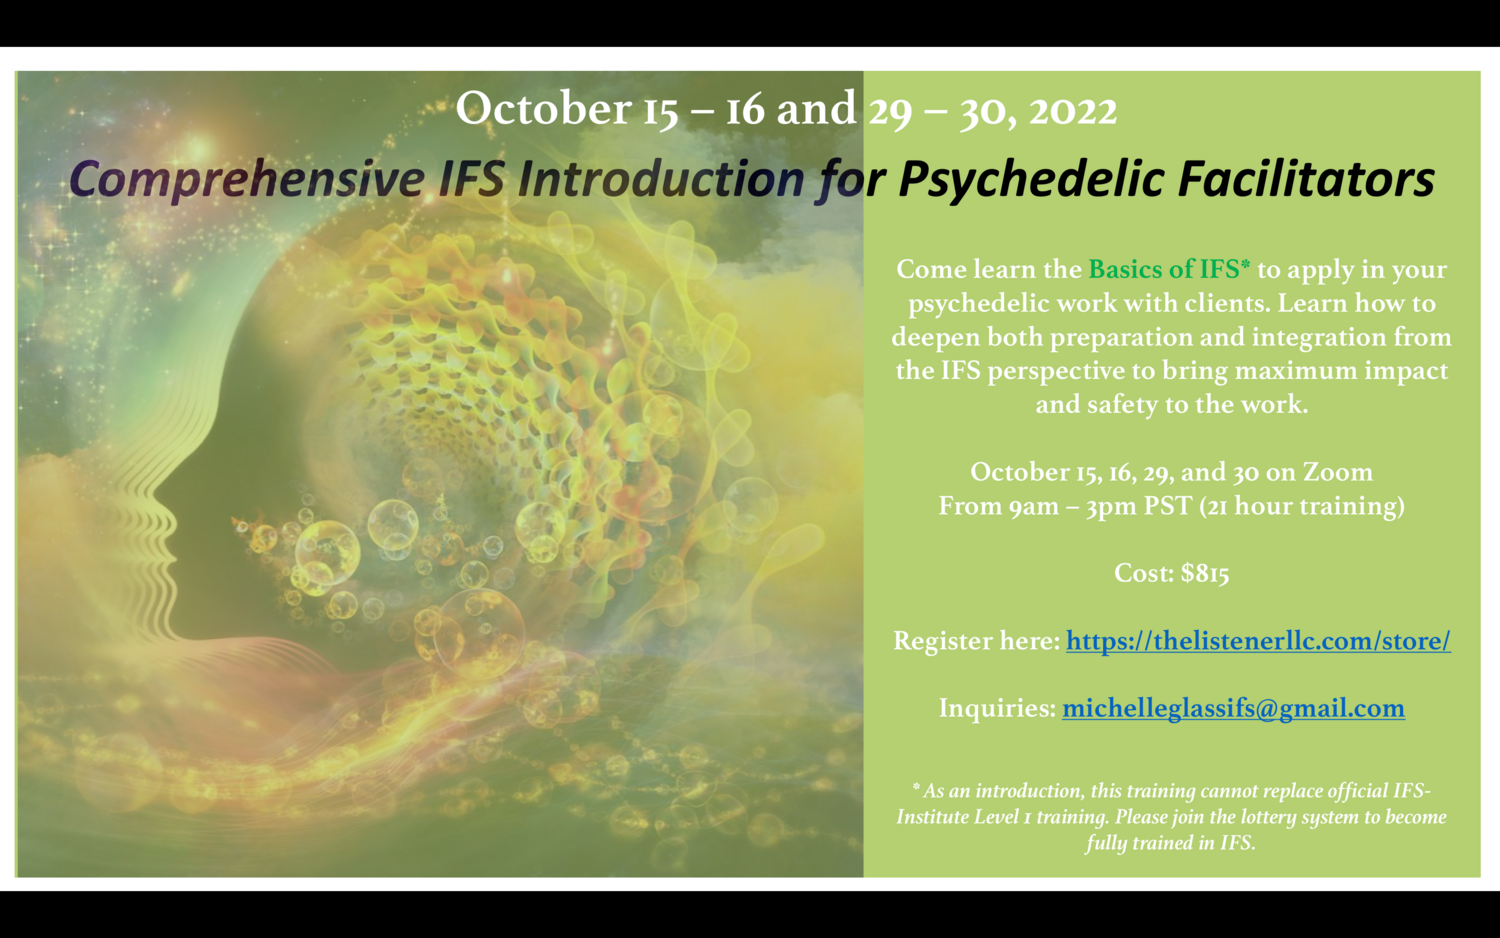 Comprehensive IFS Introduction for Psychedelic Facilitators